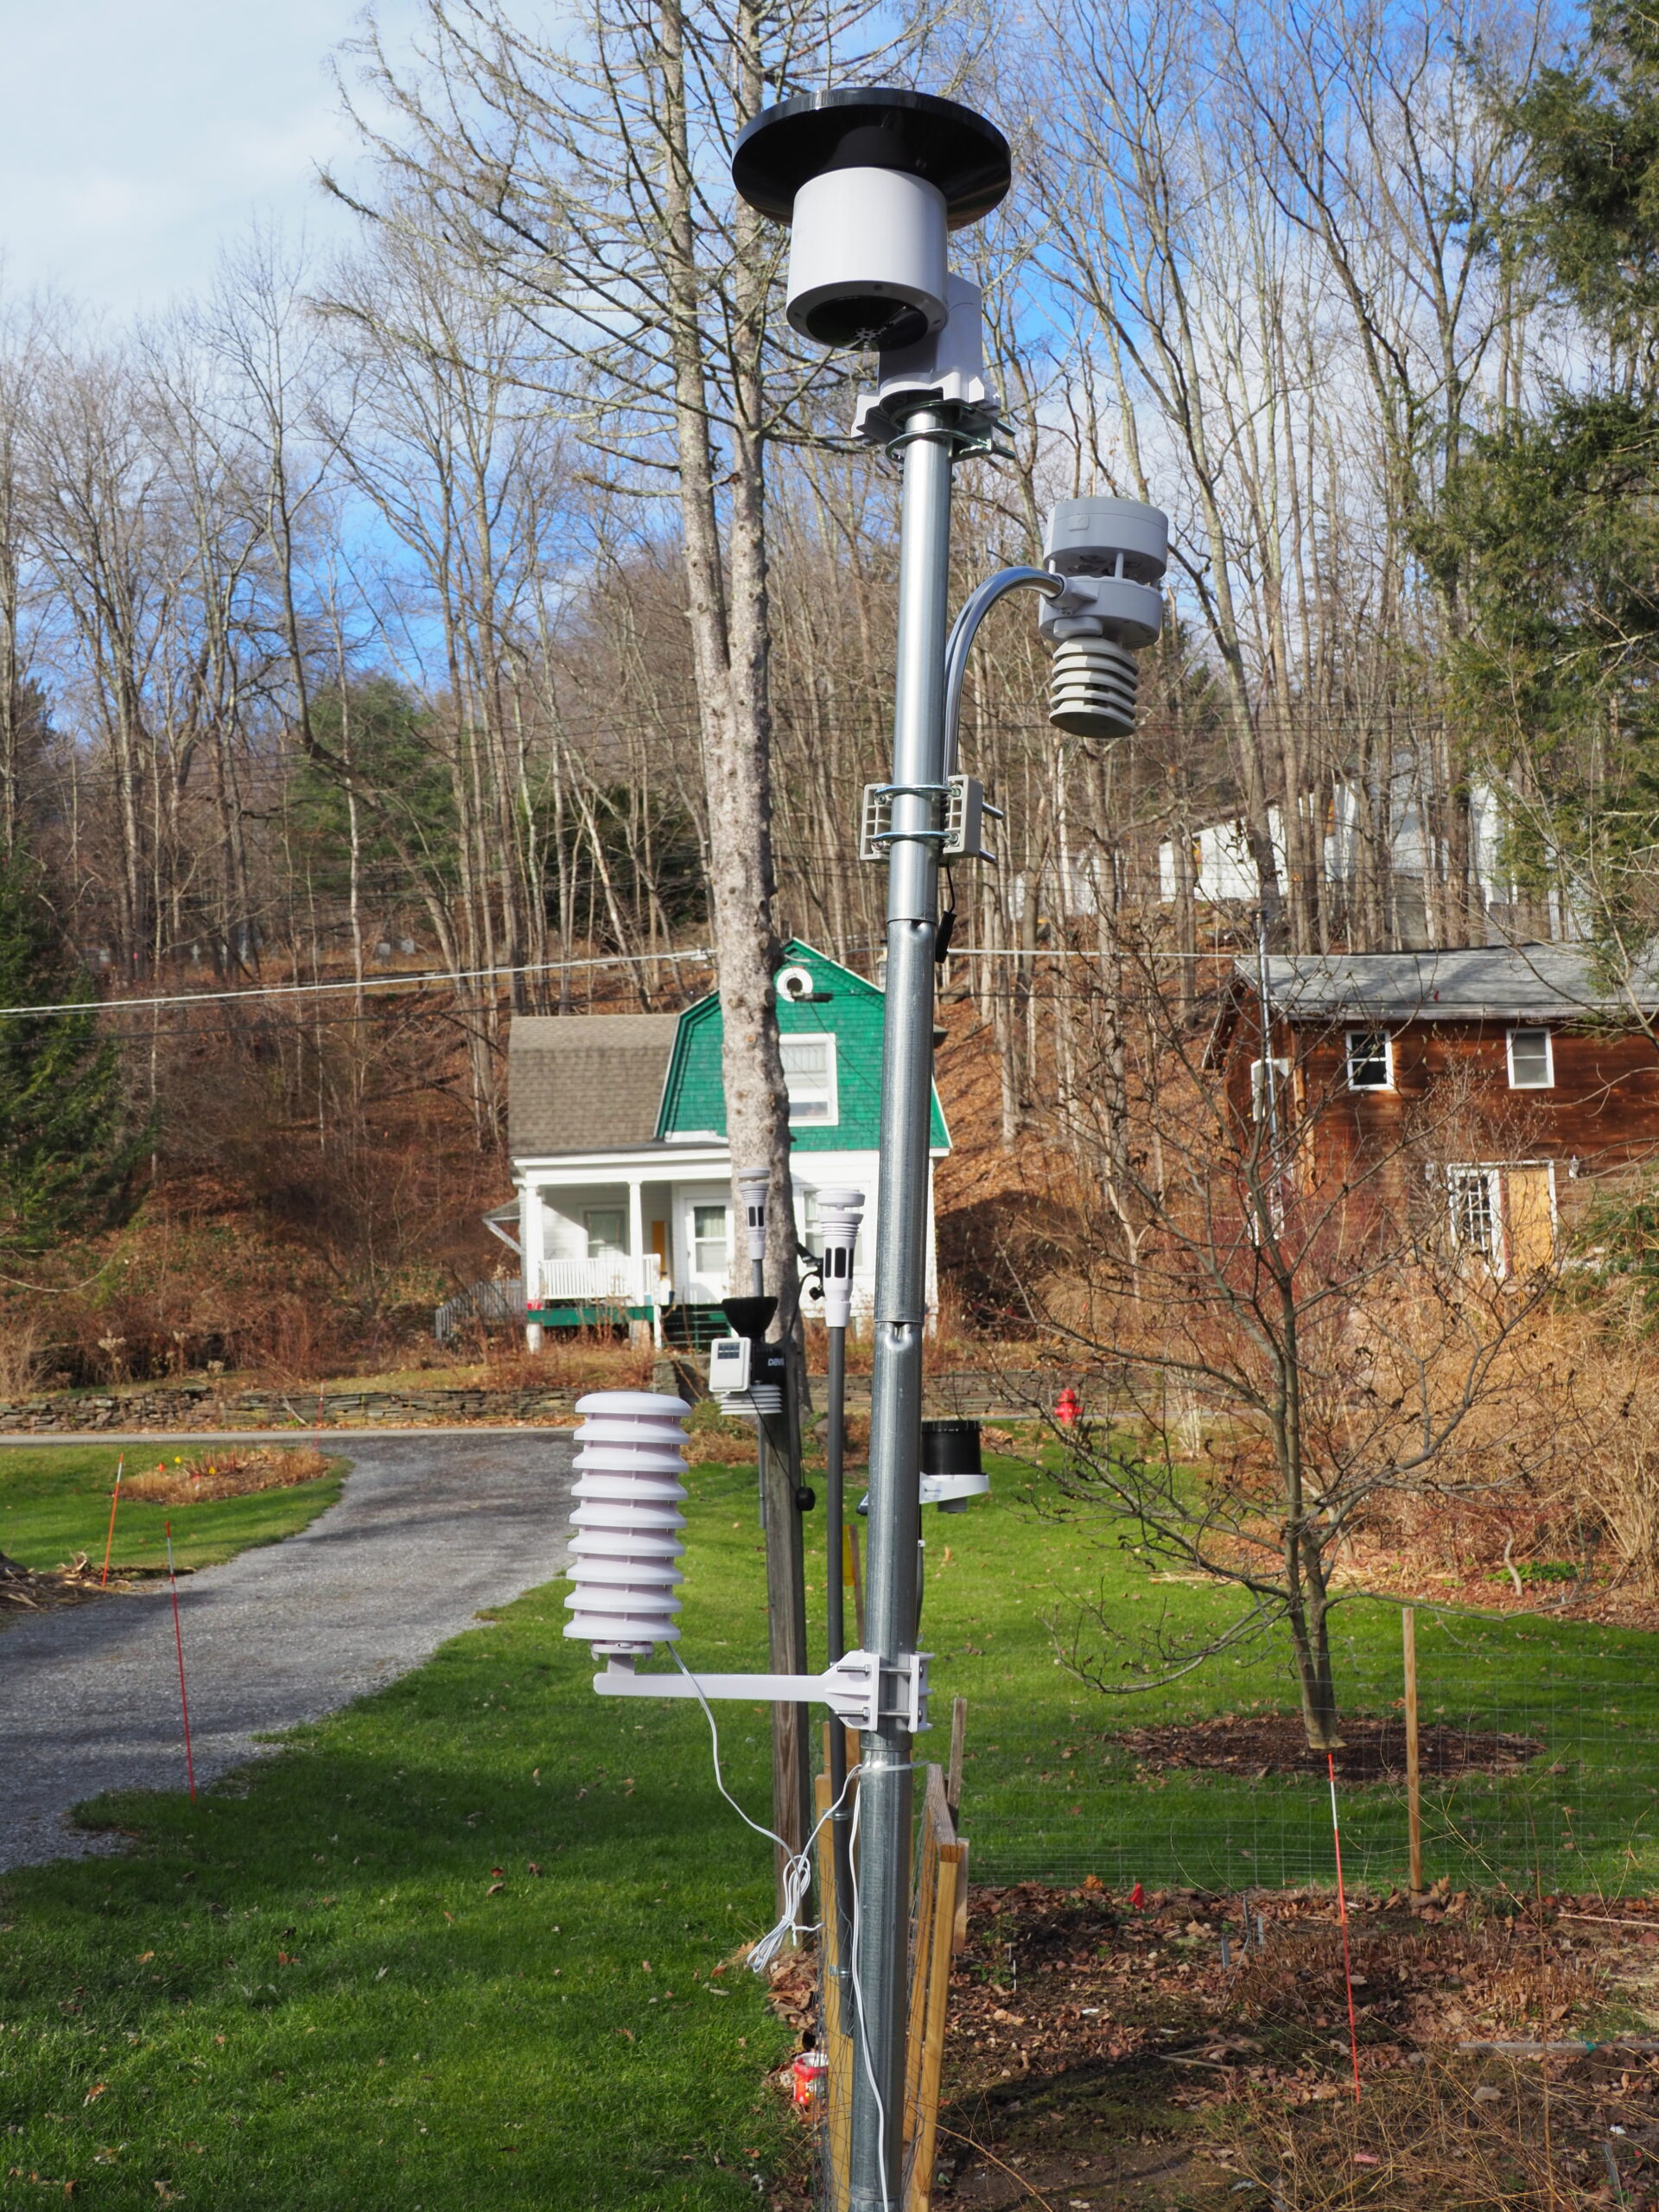 All the five weather stations in a row. This certainly got the neighbors curious and wondering what kind of electronic surveillance they were being subject to. None. ANDREW MESSINGER